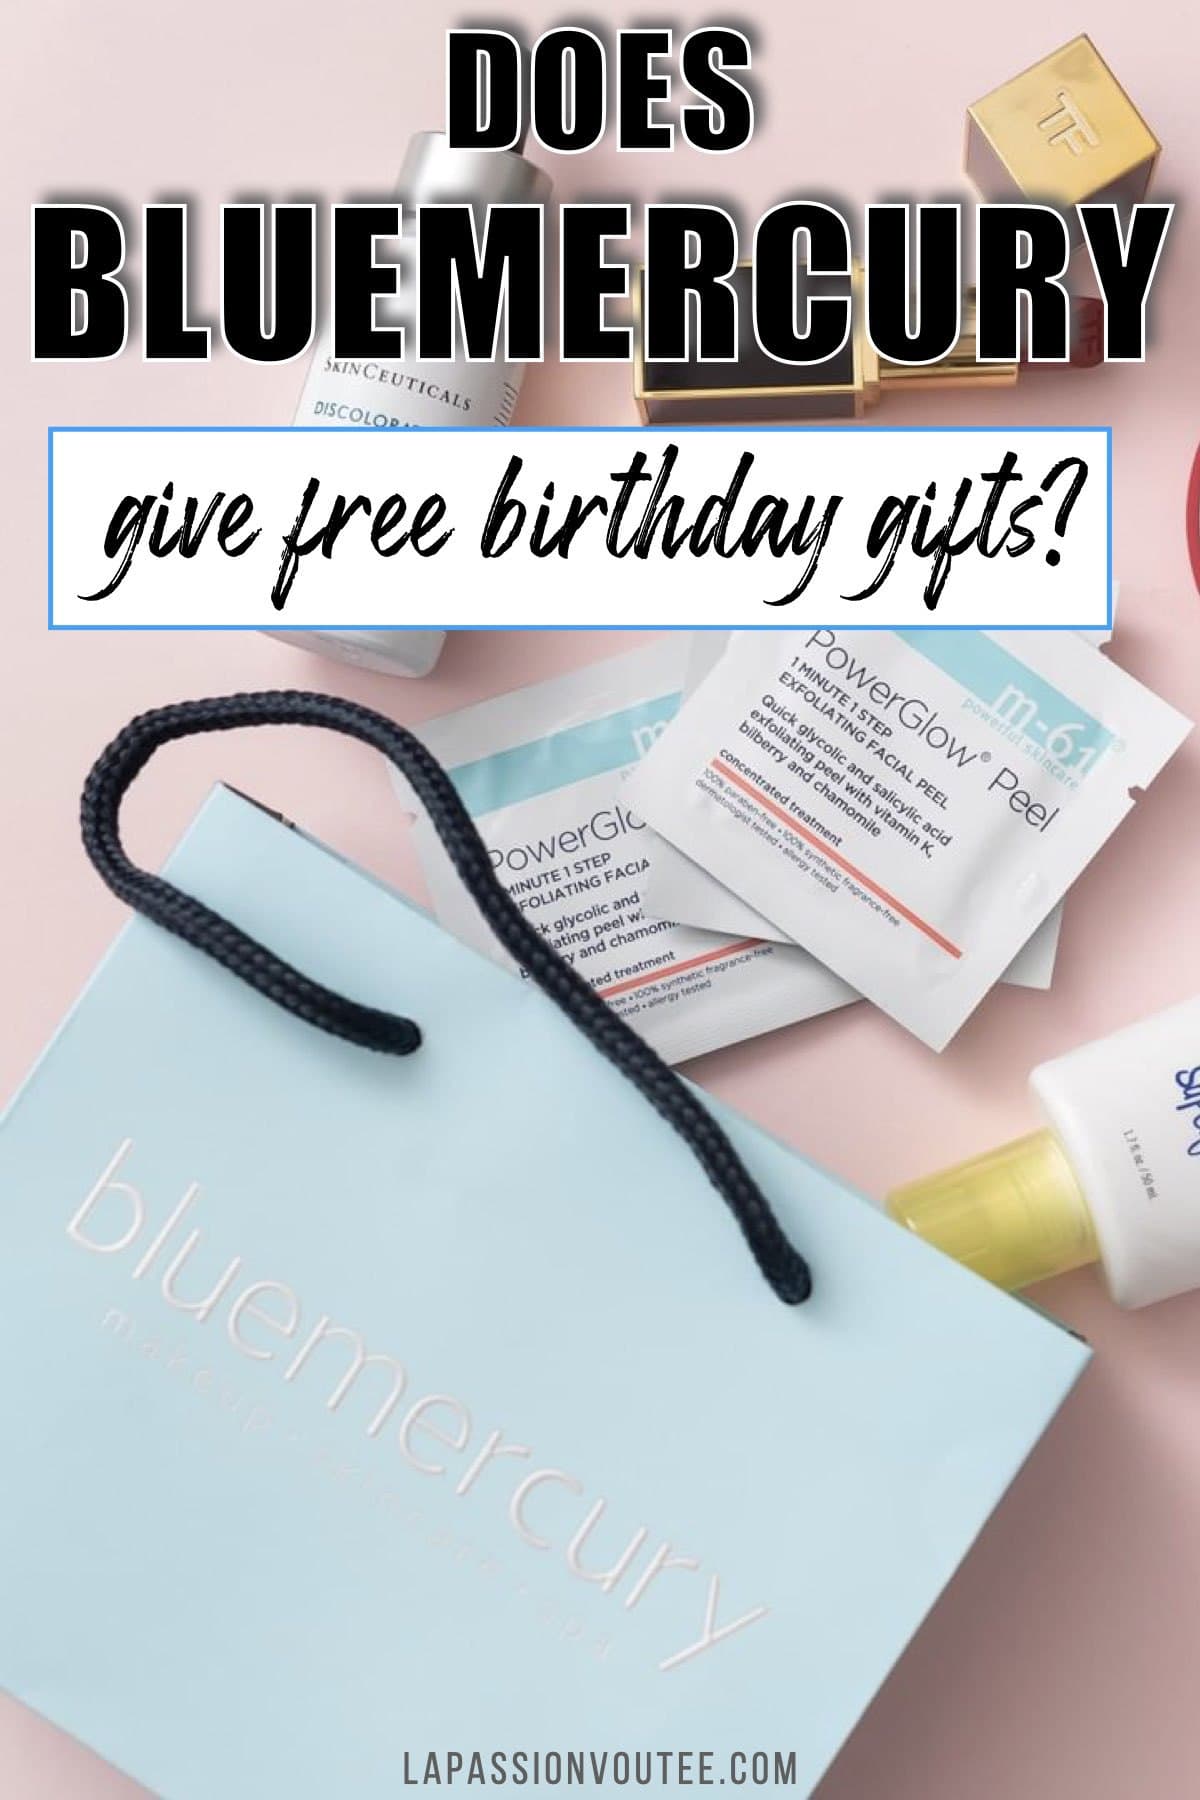 Birthday loading? Ulta and Sephora are not the only beauty and skincare brands that offer FREE birthday gifts. In fact, Bluemercury BlueRewards birthday gifts are the most generous I've seen. Here's how to claim your gift!